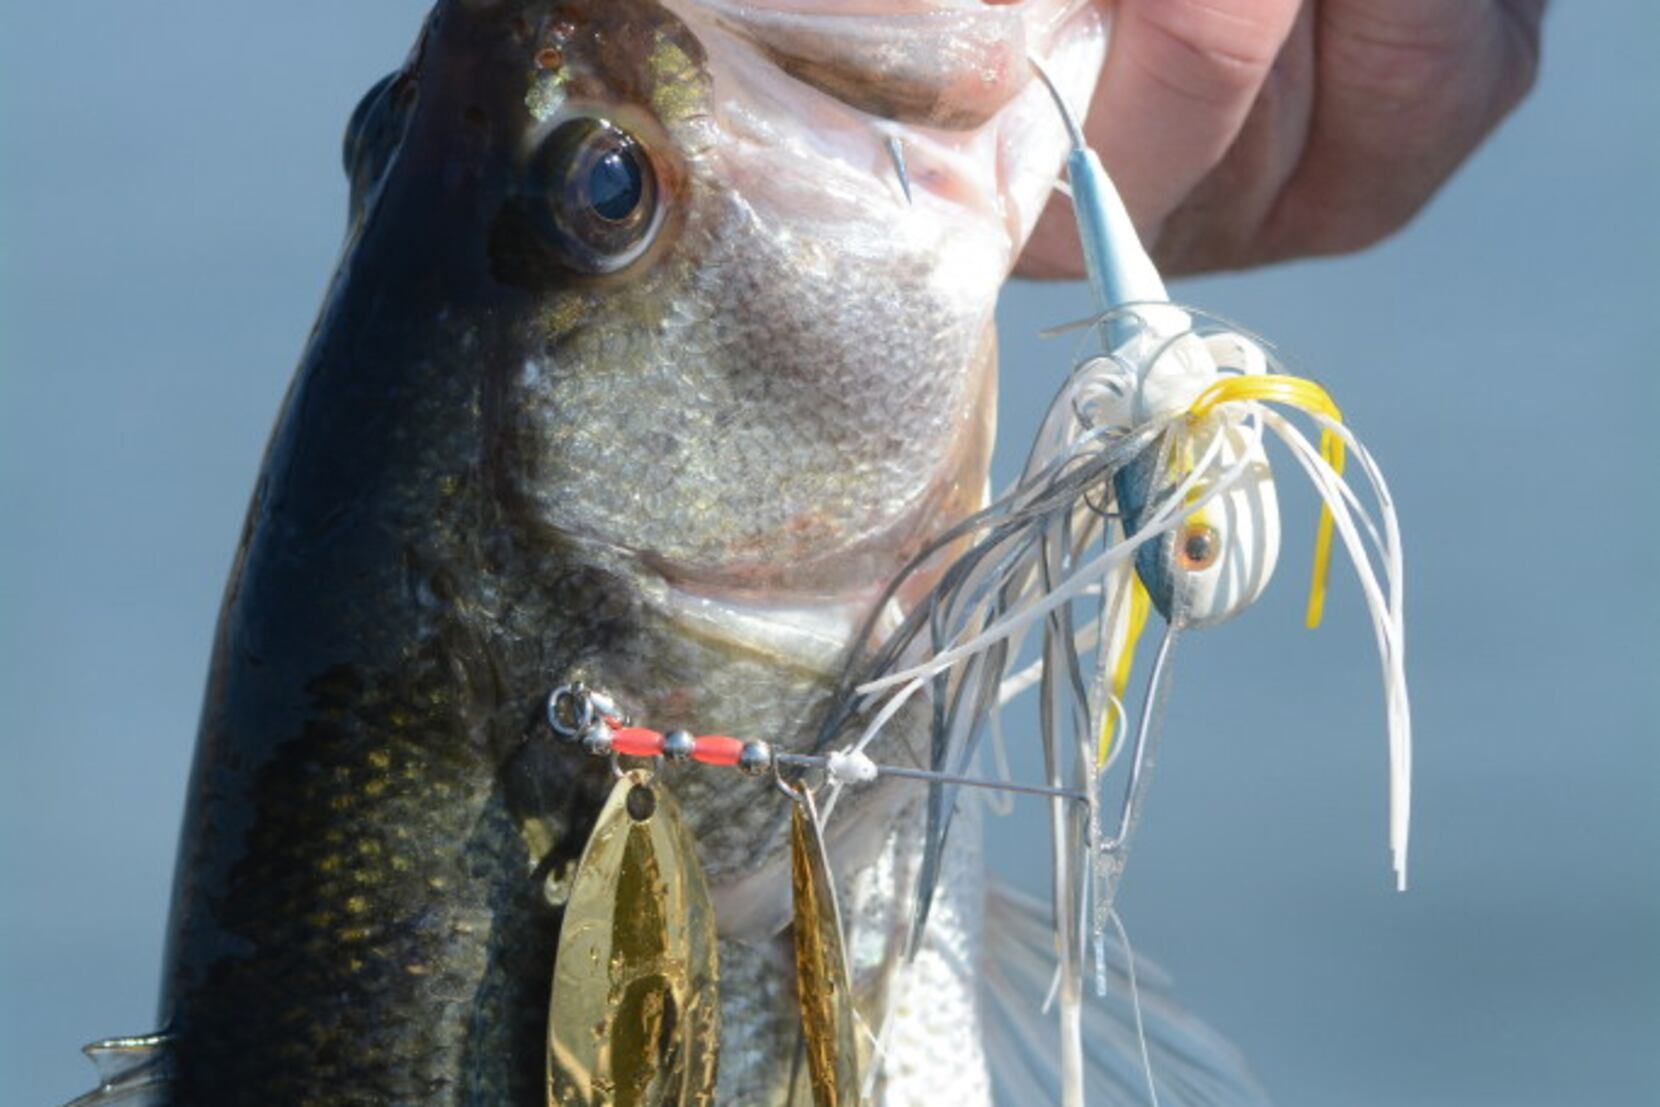 When using spinnerbaits, it seems like fish are always biting